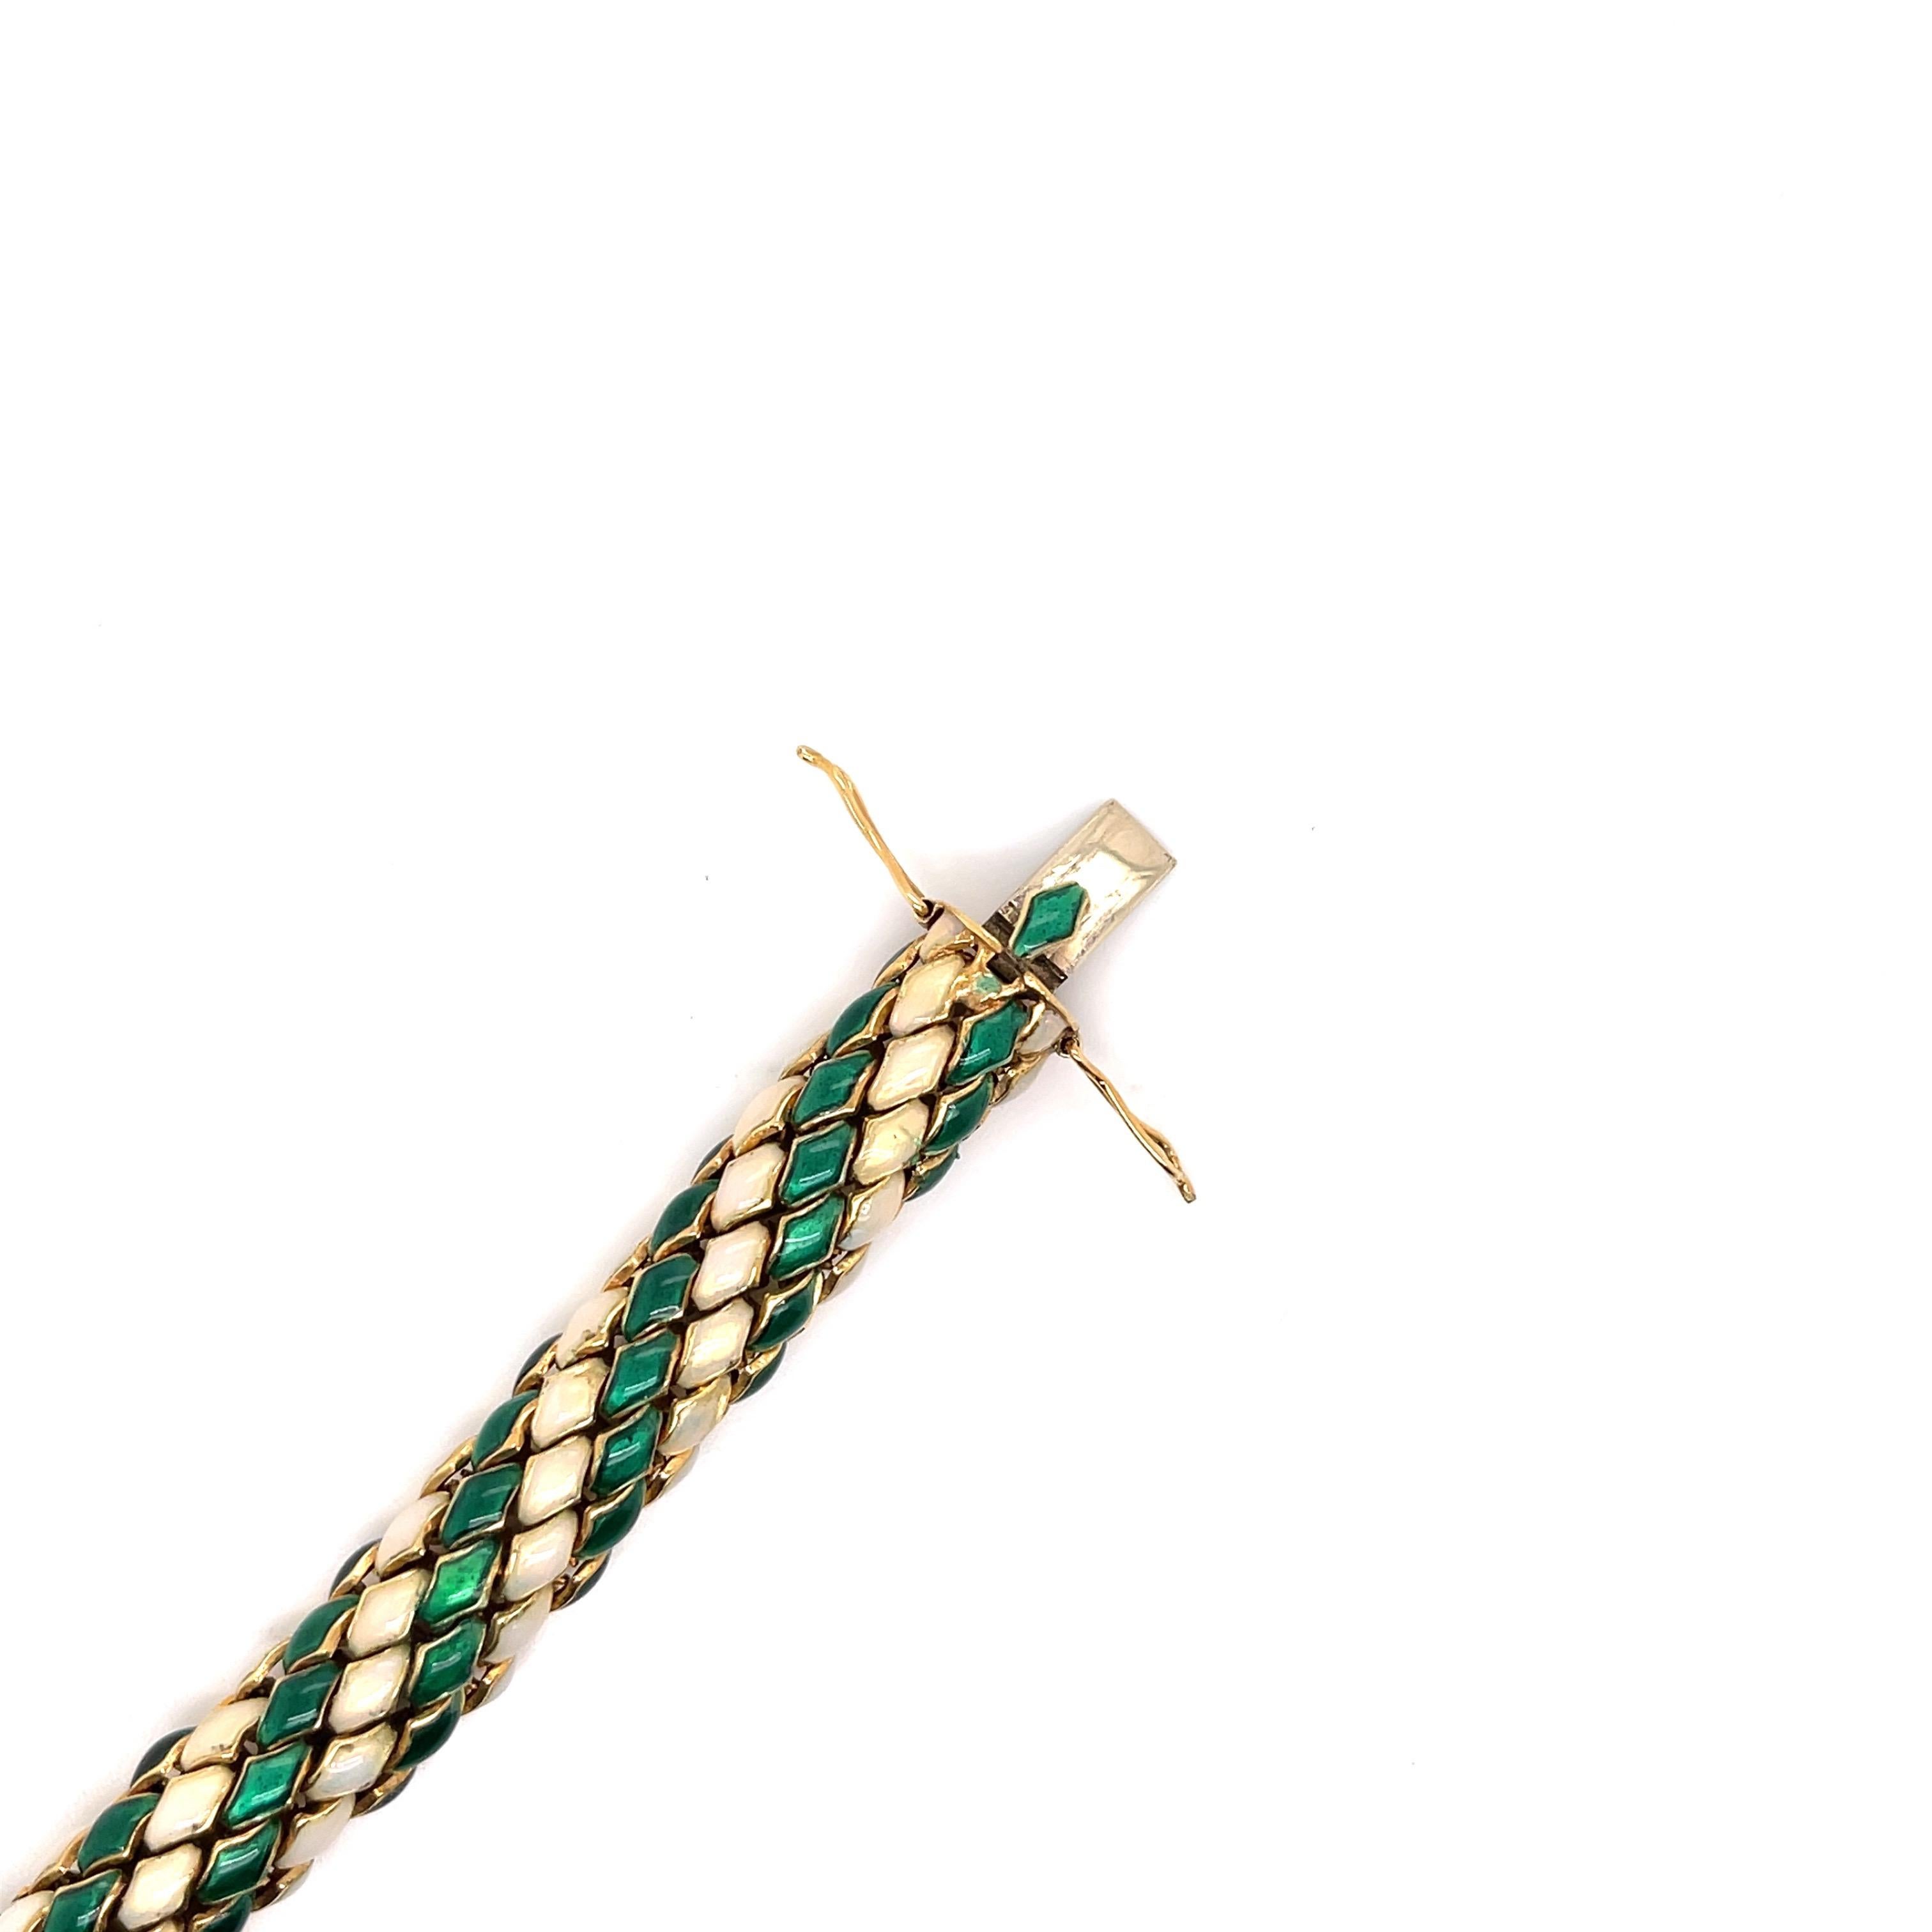 Enamel Green and White Flexible Bracelet In Good Condition For Sale In New York, NY